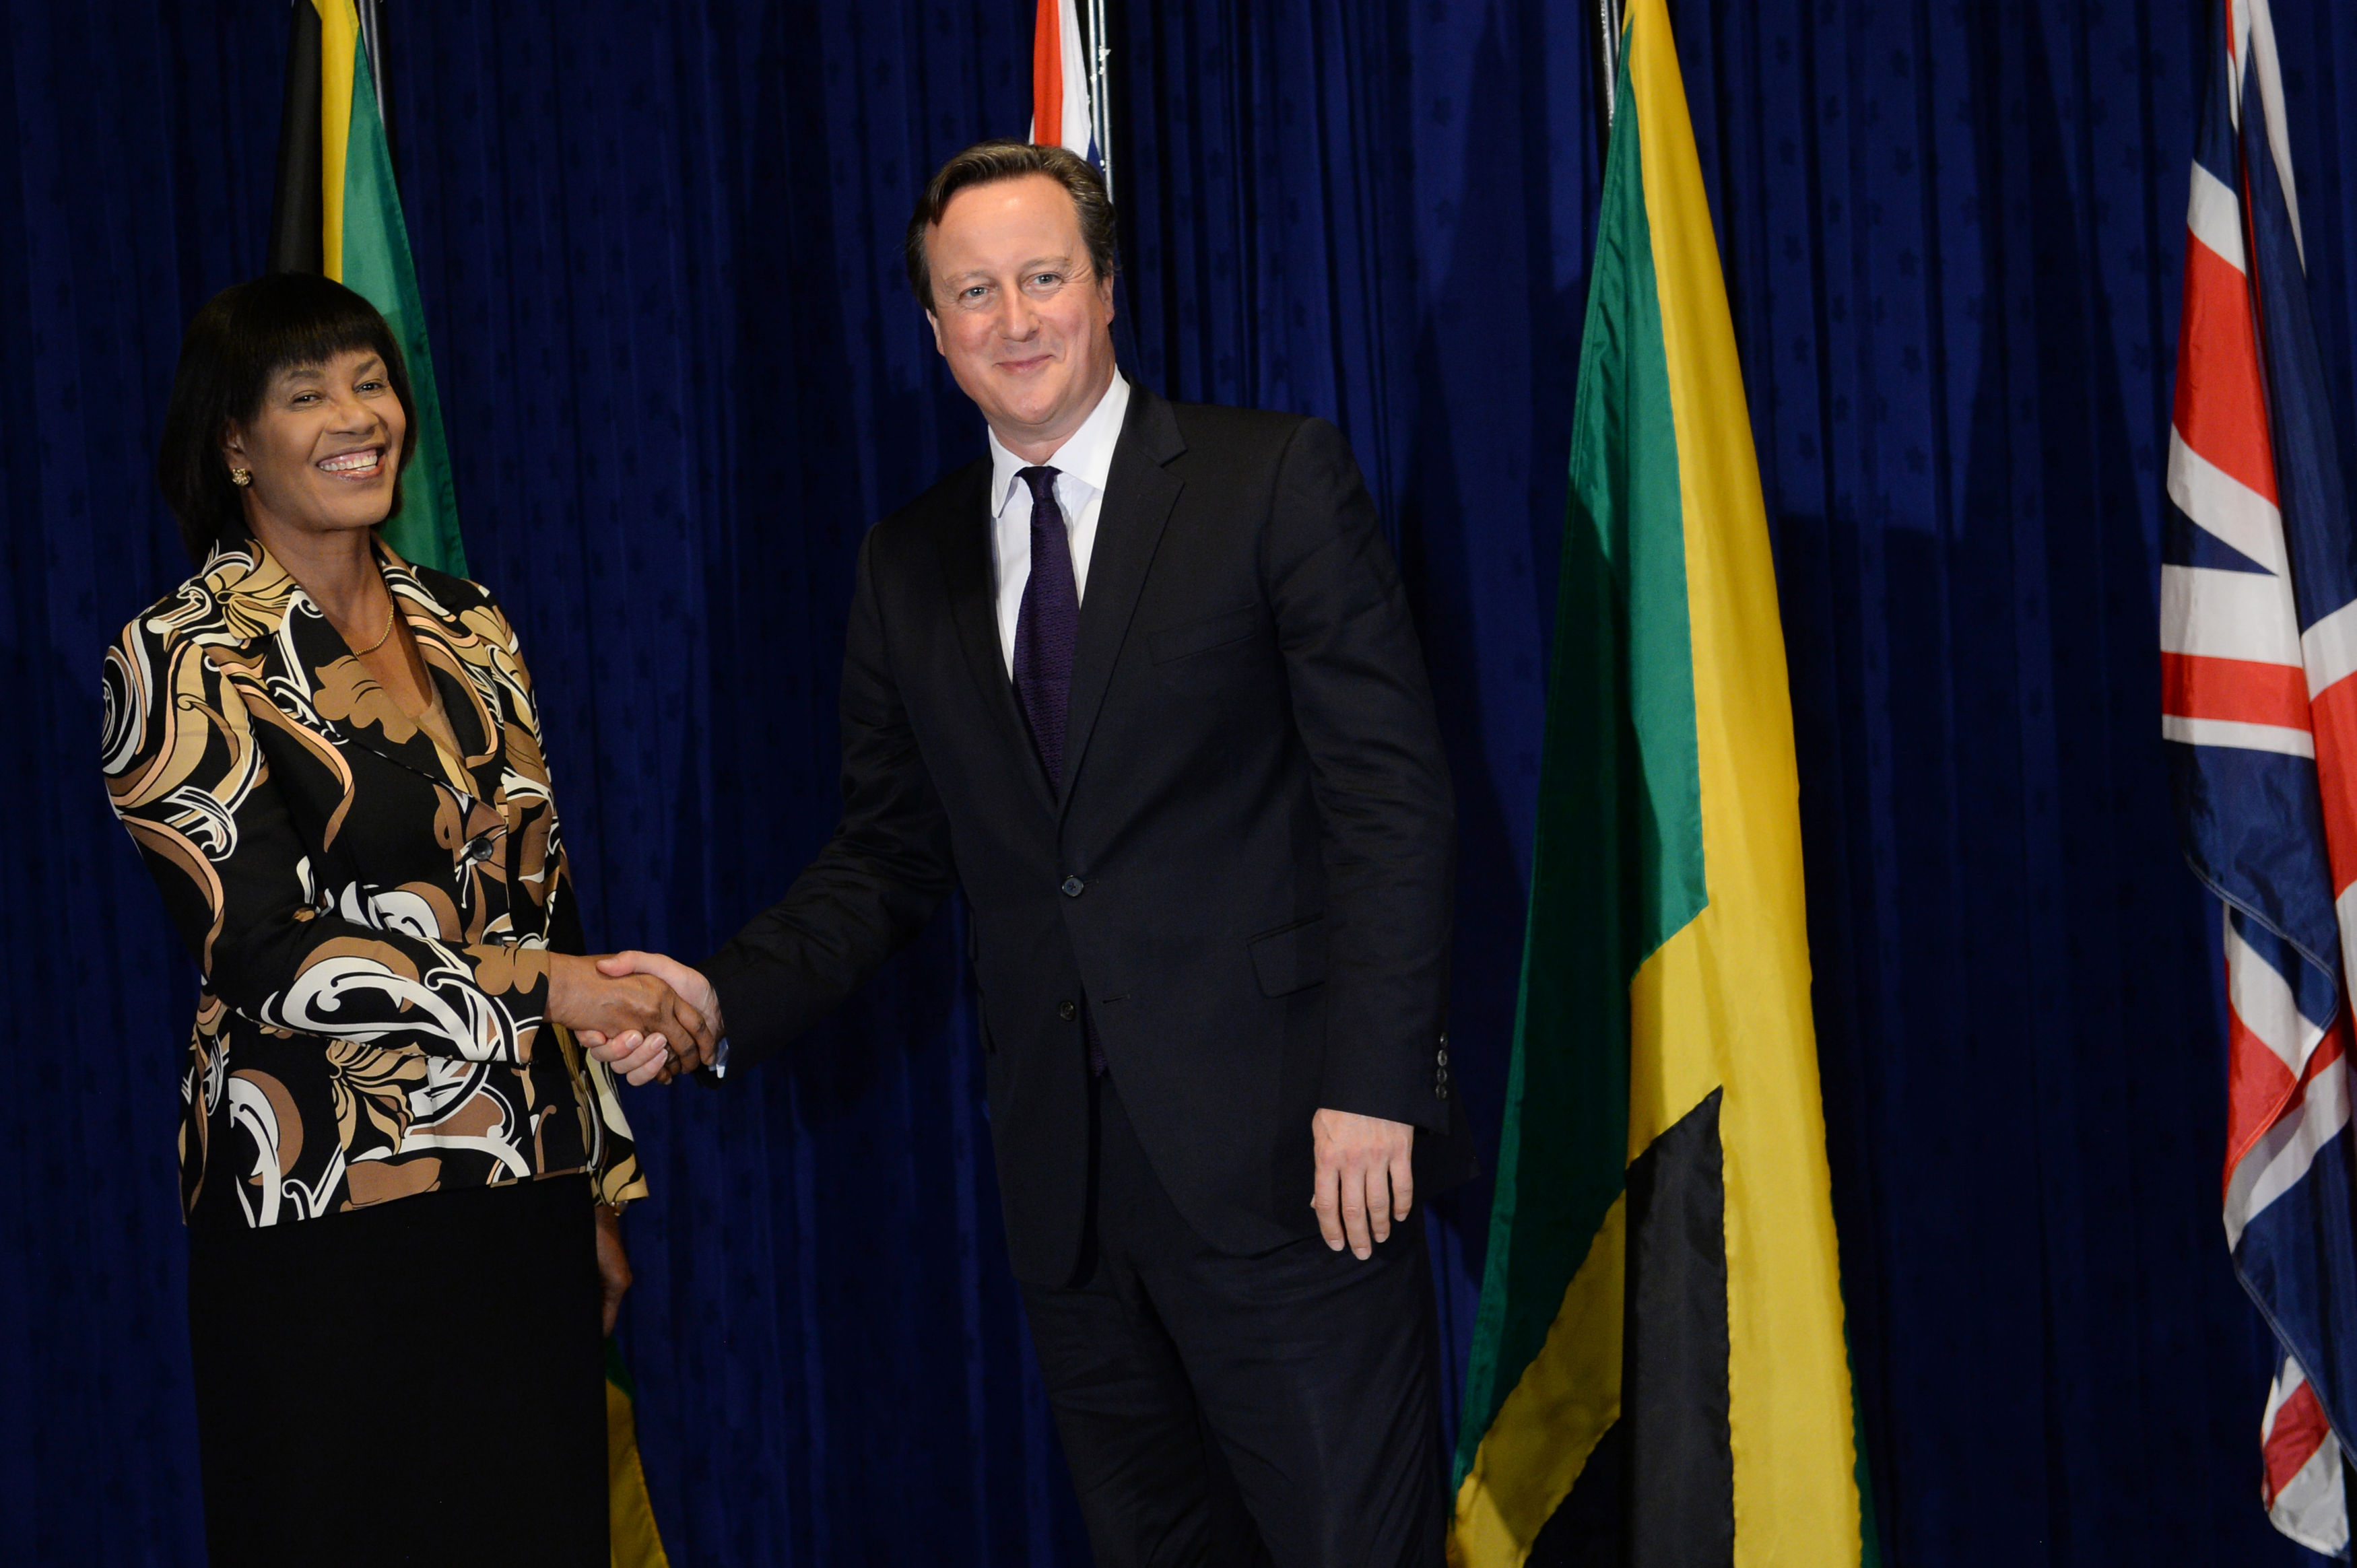 Cameron visit to Caribbean - Day One